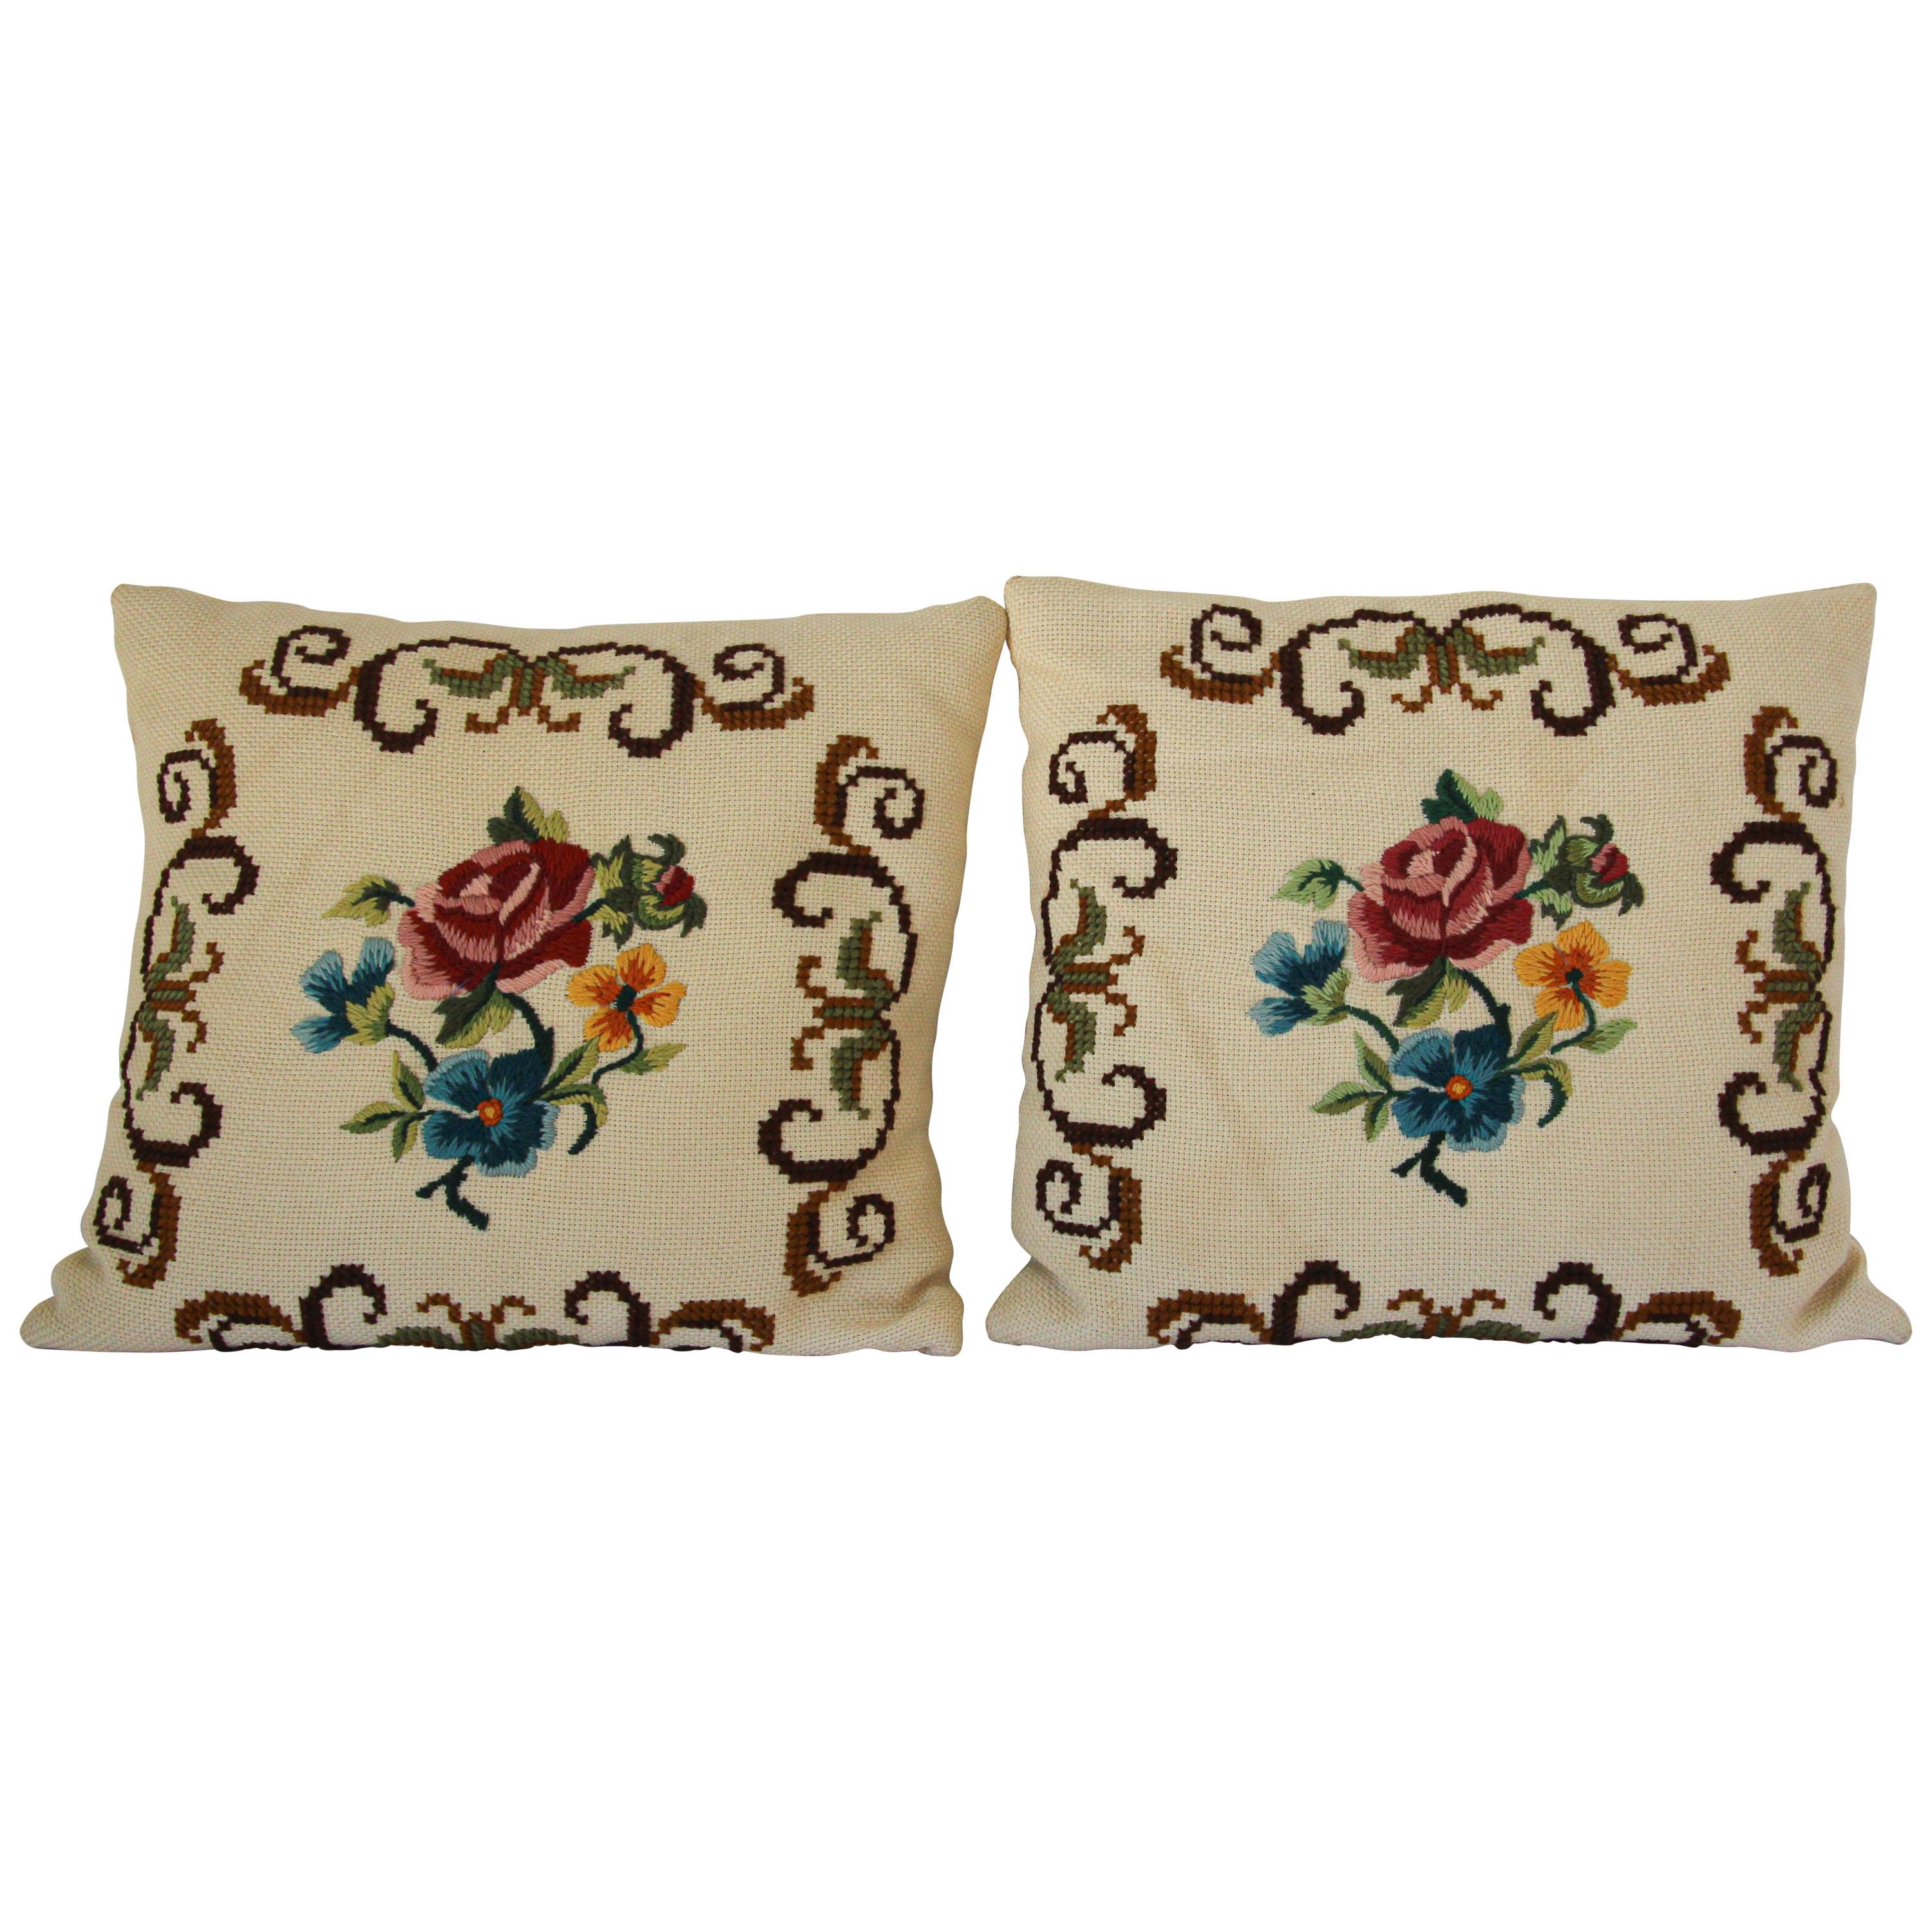 French Provincial Handmade Needlepoint Pillows For Sale at 1stDibs  french  provincial pillows, french needlepoint pillows, french pillows